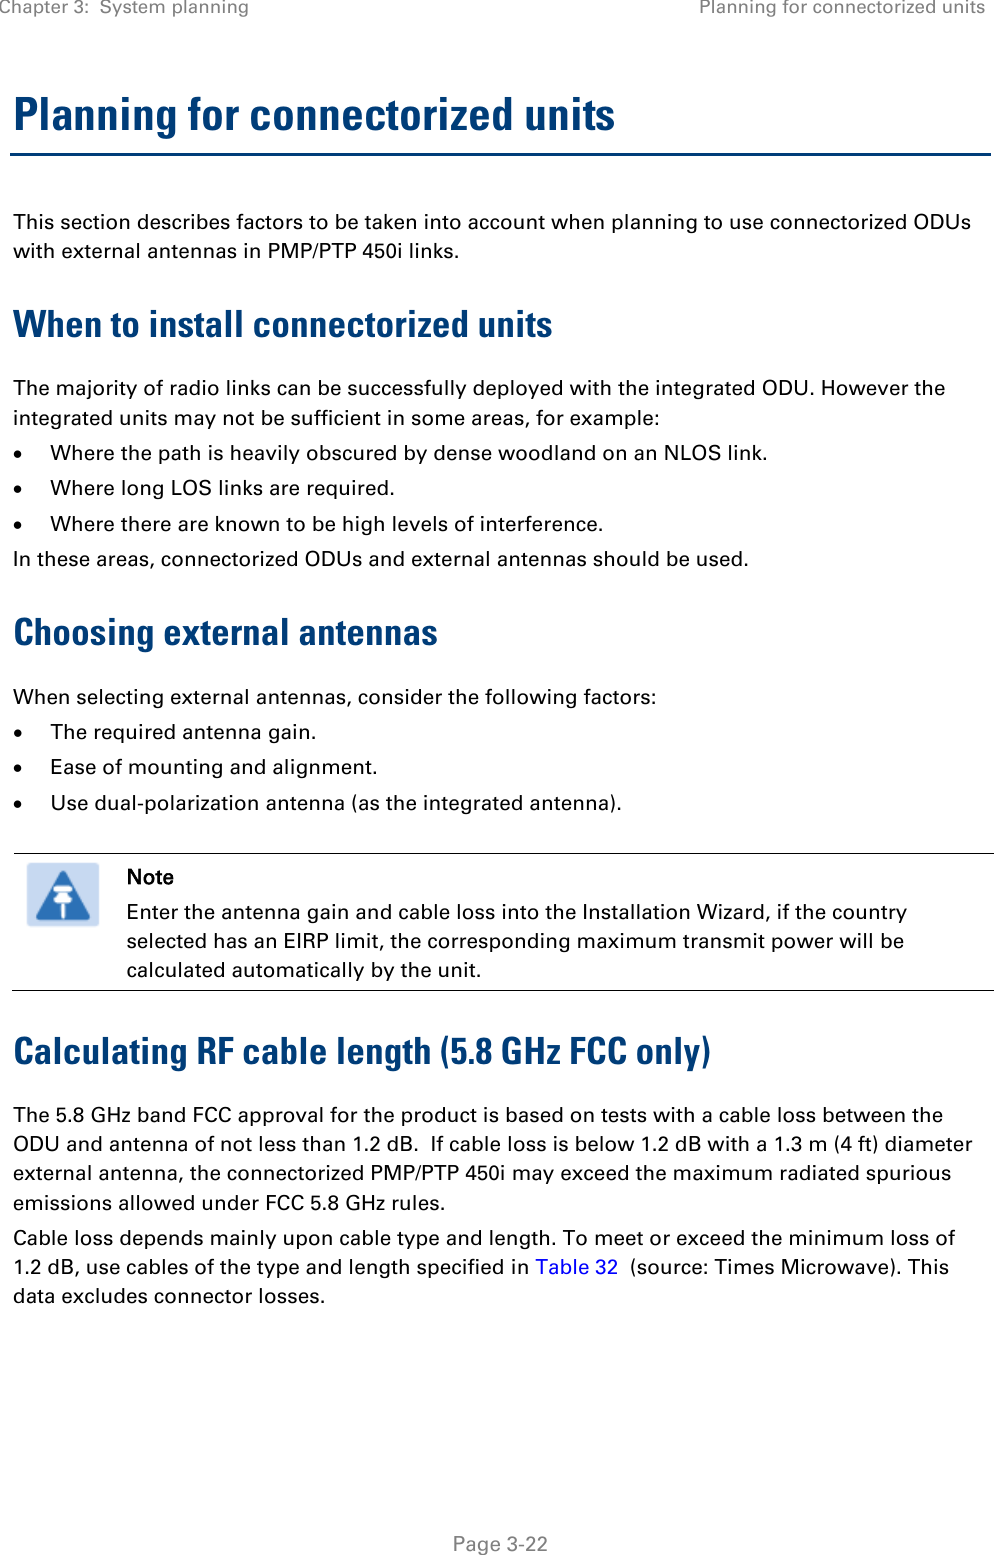 Chapter 3:  System planning Planning for connectorized units   Page 3-22 Planning for connectorized units This section describes factors to be taken into account when planning to use connectorized ODUs with external antennas in PMP/PTP 450i links. When to install connectorized units The majority of radio links can be successfully deployed with the integrated ODU. However the integrated units may not be sufficient in some areas, for example: • Where the path is heavily obscured by dense woodland on an NLOS link. • Where long LOS links are required.  • Where there are known to be high levels of interference. In these areas, connectorized ODUs and external antennas should be used. Choosing external antennas When selecting external antennas, consider the following factors: • The required antenna gain. • Ease of mounting and alignment. • Use dual-polarization antenna (as the integrated antenna).   Note Enter the antenna gain and cable loss into the Installation Wizard, if the country selected has an EIRP limit, the corresponding maximum transmit power will be calculated automatically by the unit. Calculating RF cable length (5.8 GHz FCC only) The 5.8 GHz band FCC approval for the product is based on tests with a cable loss between the ODU and antenna of not less than 1.2 dB.  If cable loss is below 1.2 dB with a 1.3 m (4 ft) diameter external antenna, the connectorized PMP/PTP 450i may exceed the maximum radiated spurious emissions allowed under FCC 5.8 GHz rules. Cable loss depends mainly upon cable type and length. To meet or exceed the minimum loss of 1.2 dB, use cables of the type and length specified in Table 32  (source: Times Microwave). This data excludes connector losses.  